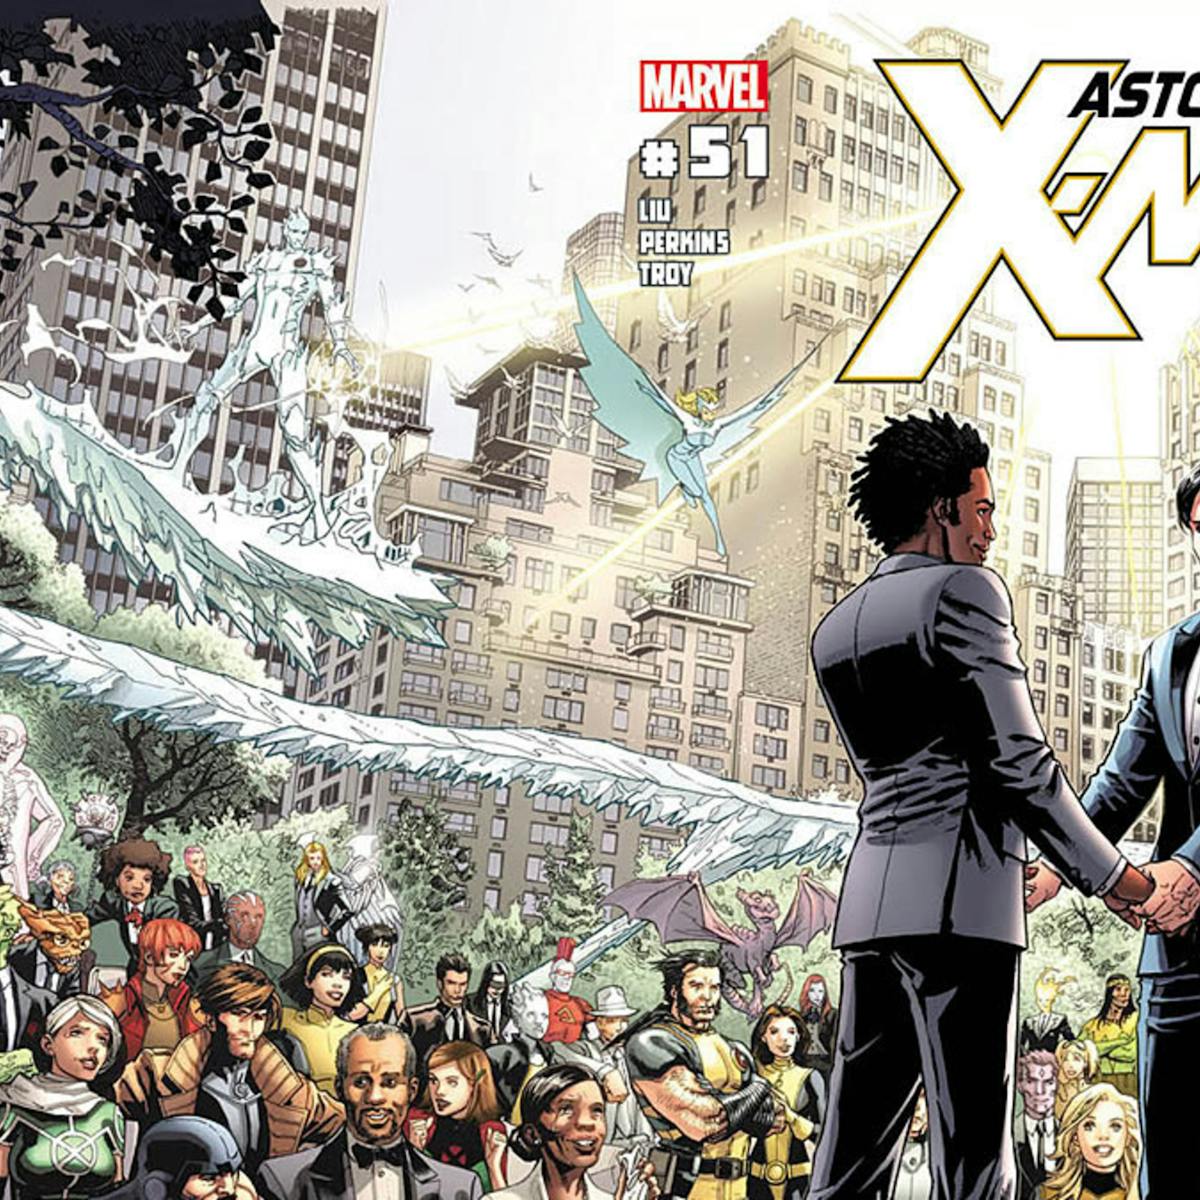 Cover of Astonishing X-Men featuring two male characters in the foreground getting married